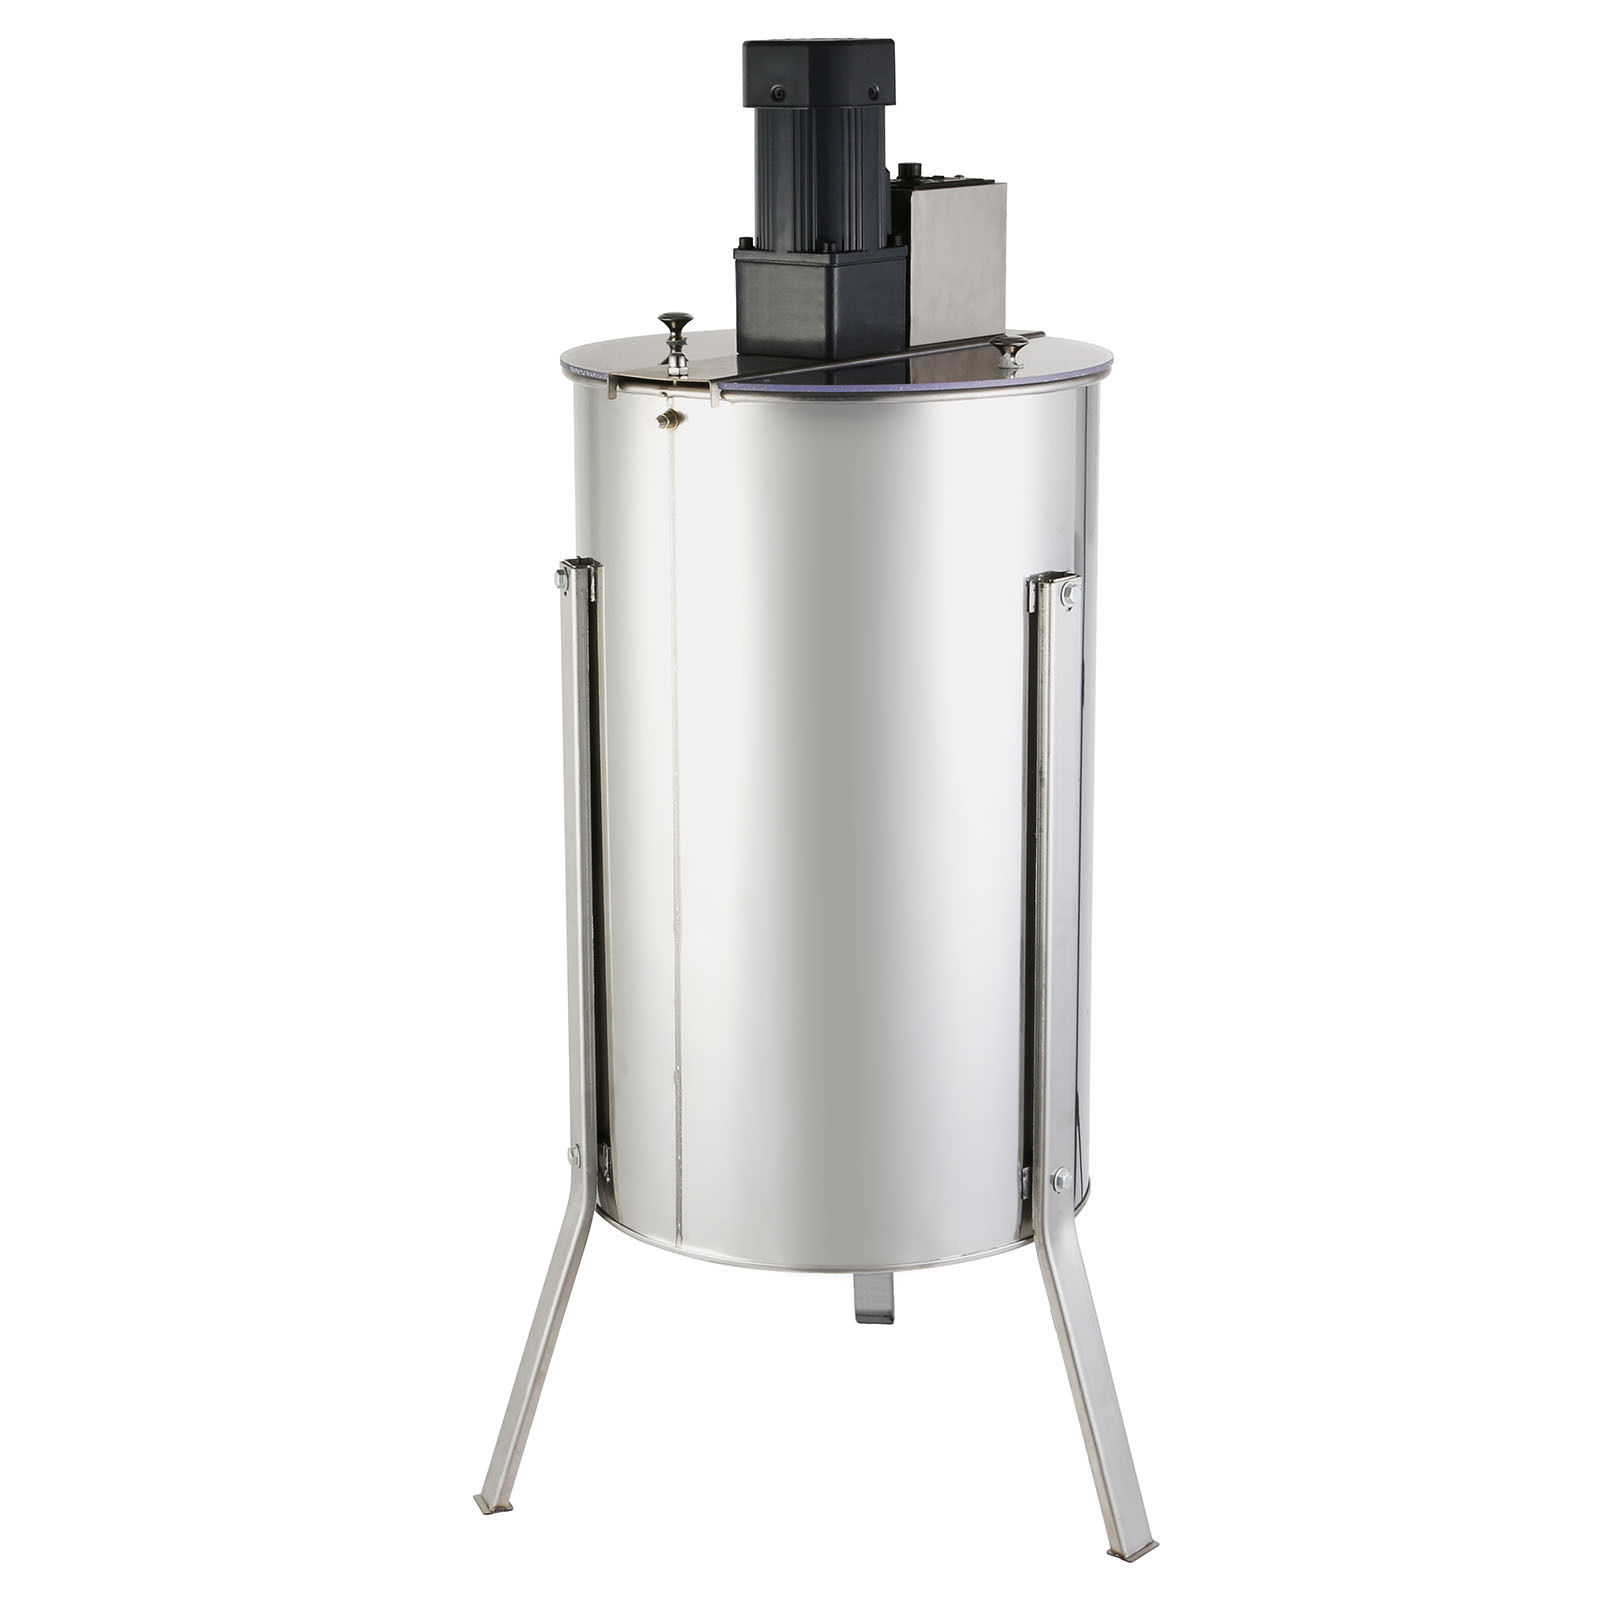 3 frames electrical honey extractor EX-02D